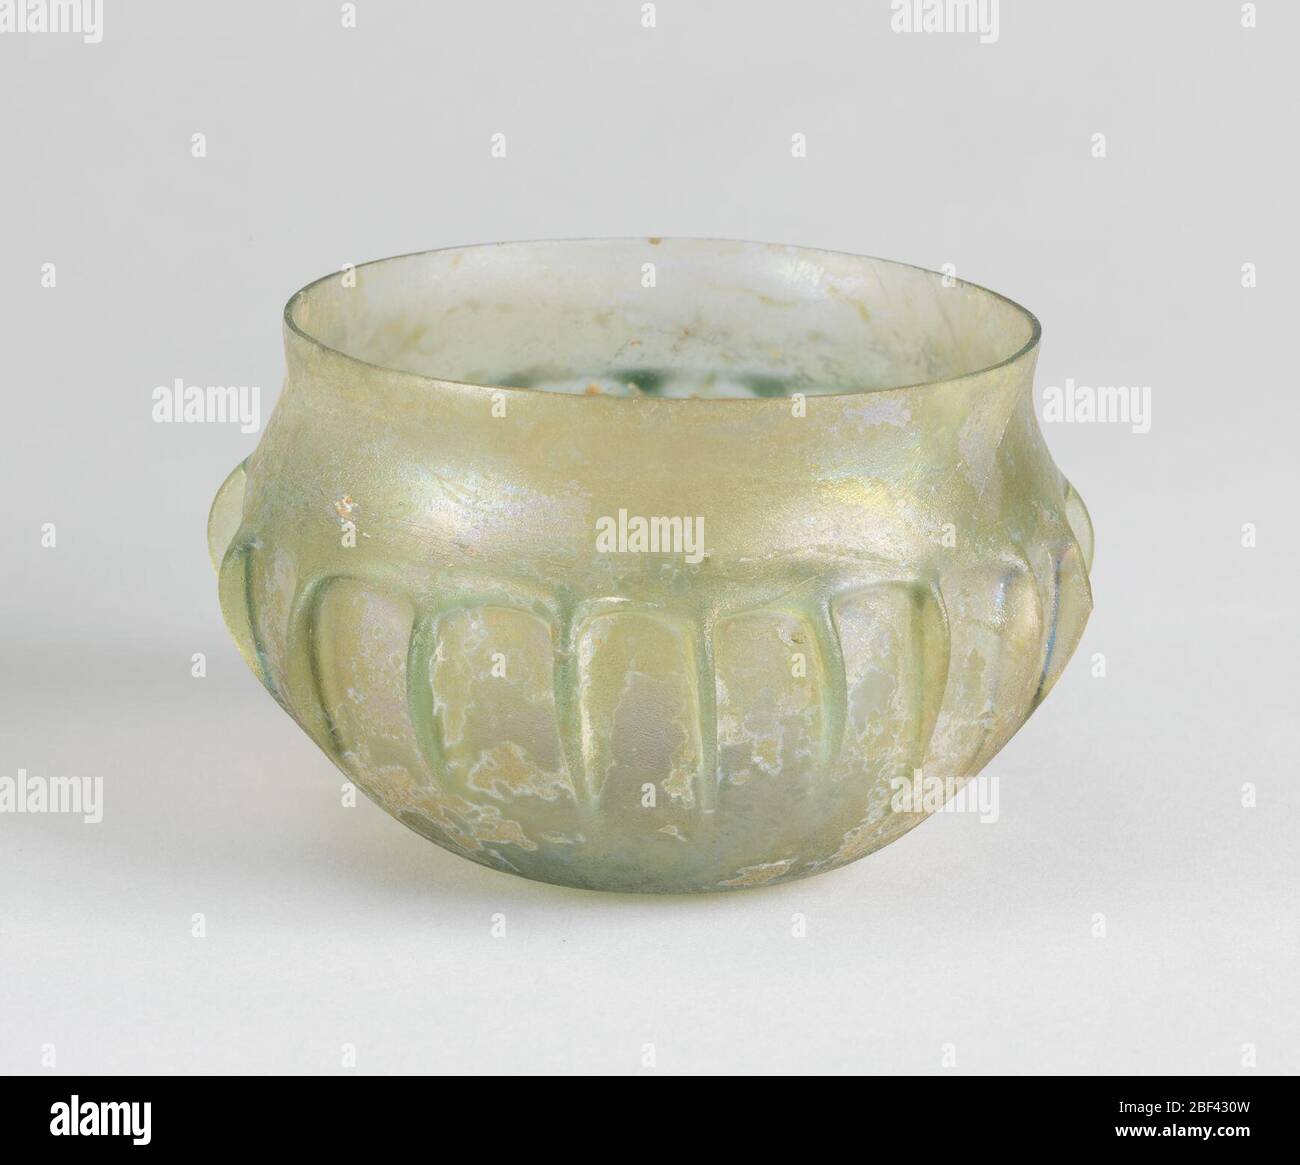 Bowl. Rounded body of greenish glass with iridescence. Vessel has contracting concave neck, continued in eighteen vertical ribs at the center of the vessel's body. Design shows derivation of Lotus-petal design. Stock Photo